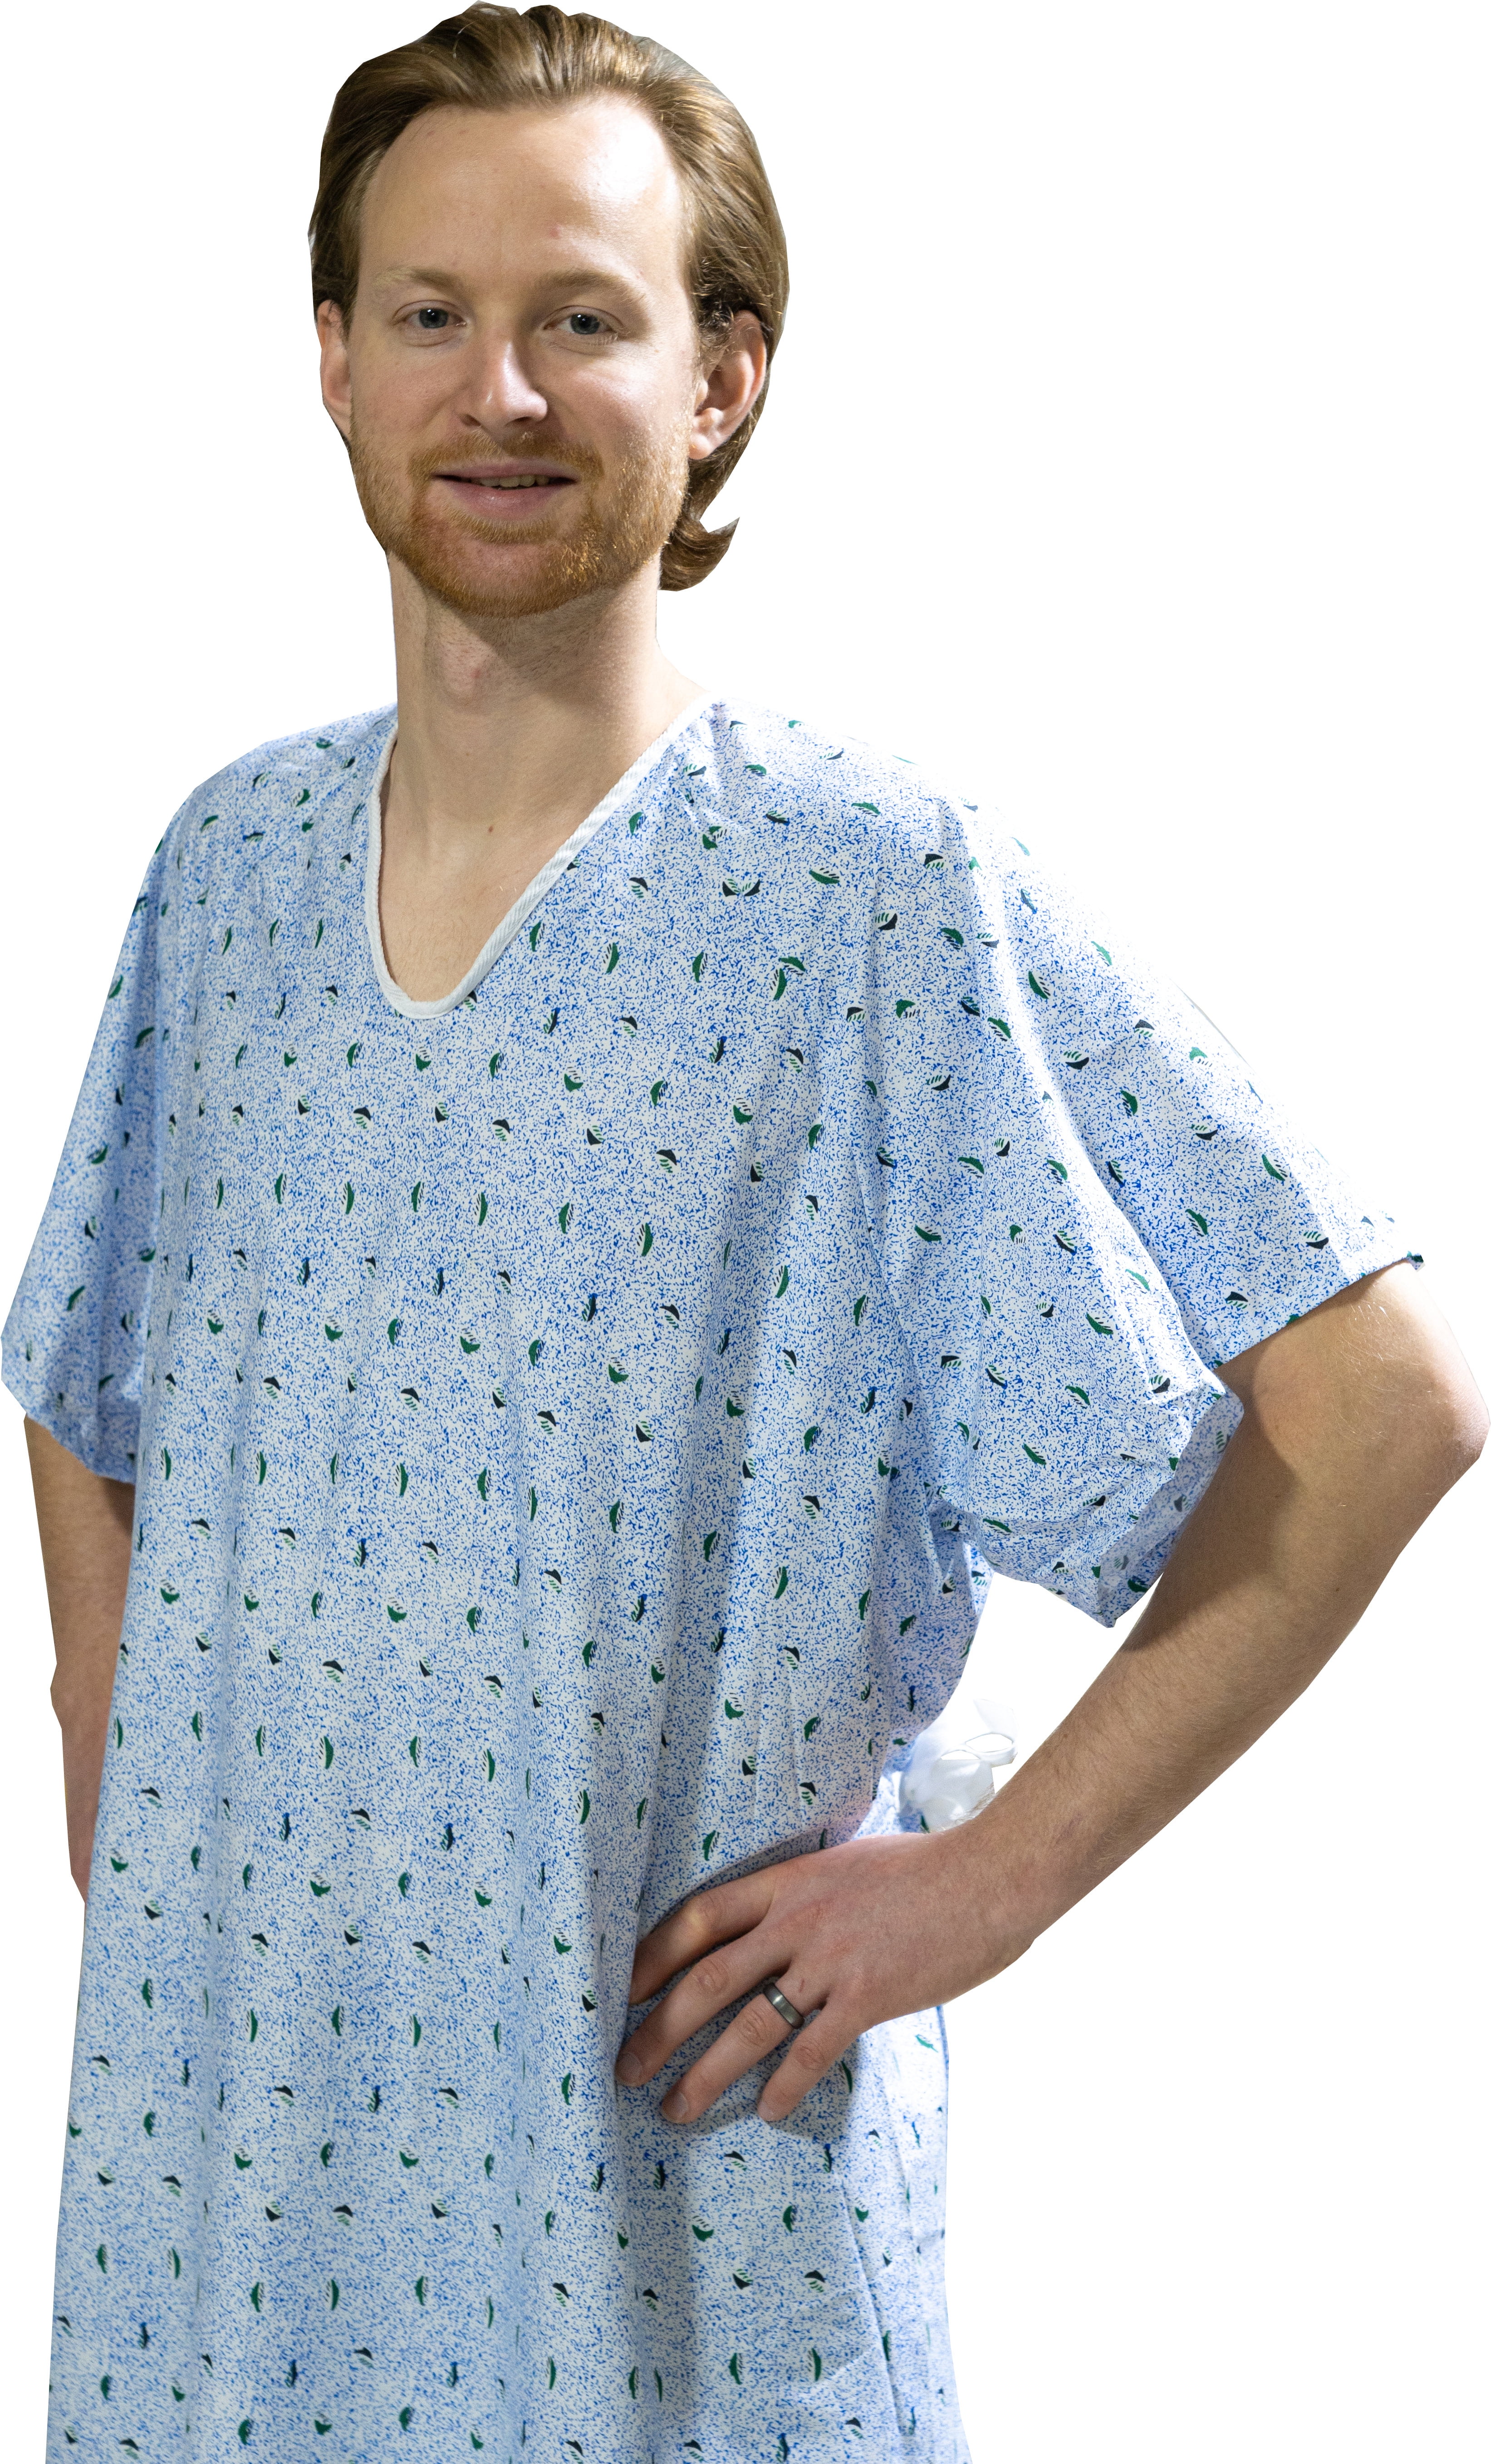 4 Pack Tie Back Hospital Gown Robe for Men Fits Sizes Small X Large 3a0dabd6 677a 4c18 b3d5 8ce560fa6f9d.1d14ecfcfb2c48652018b830a00b19c5